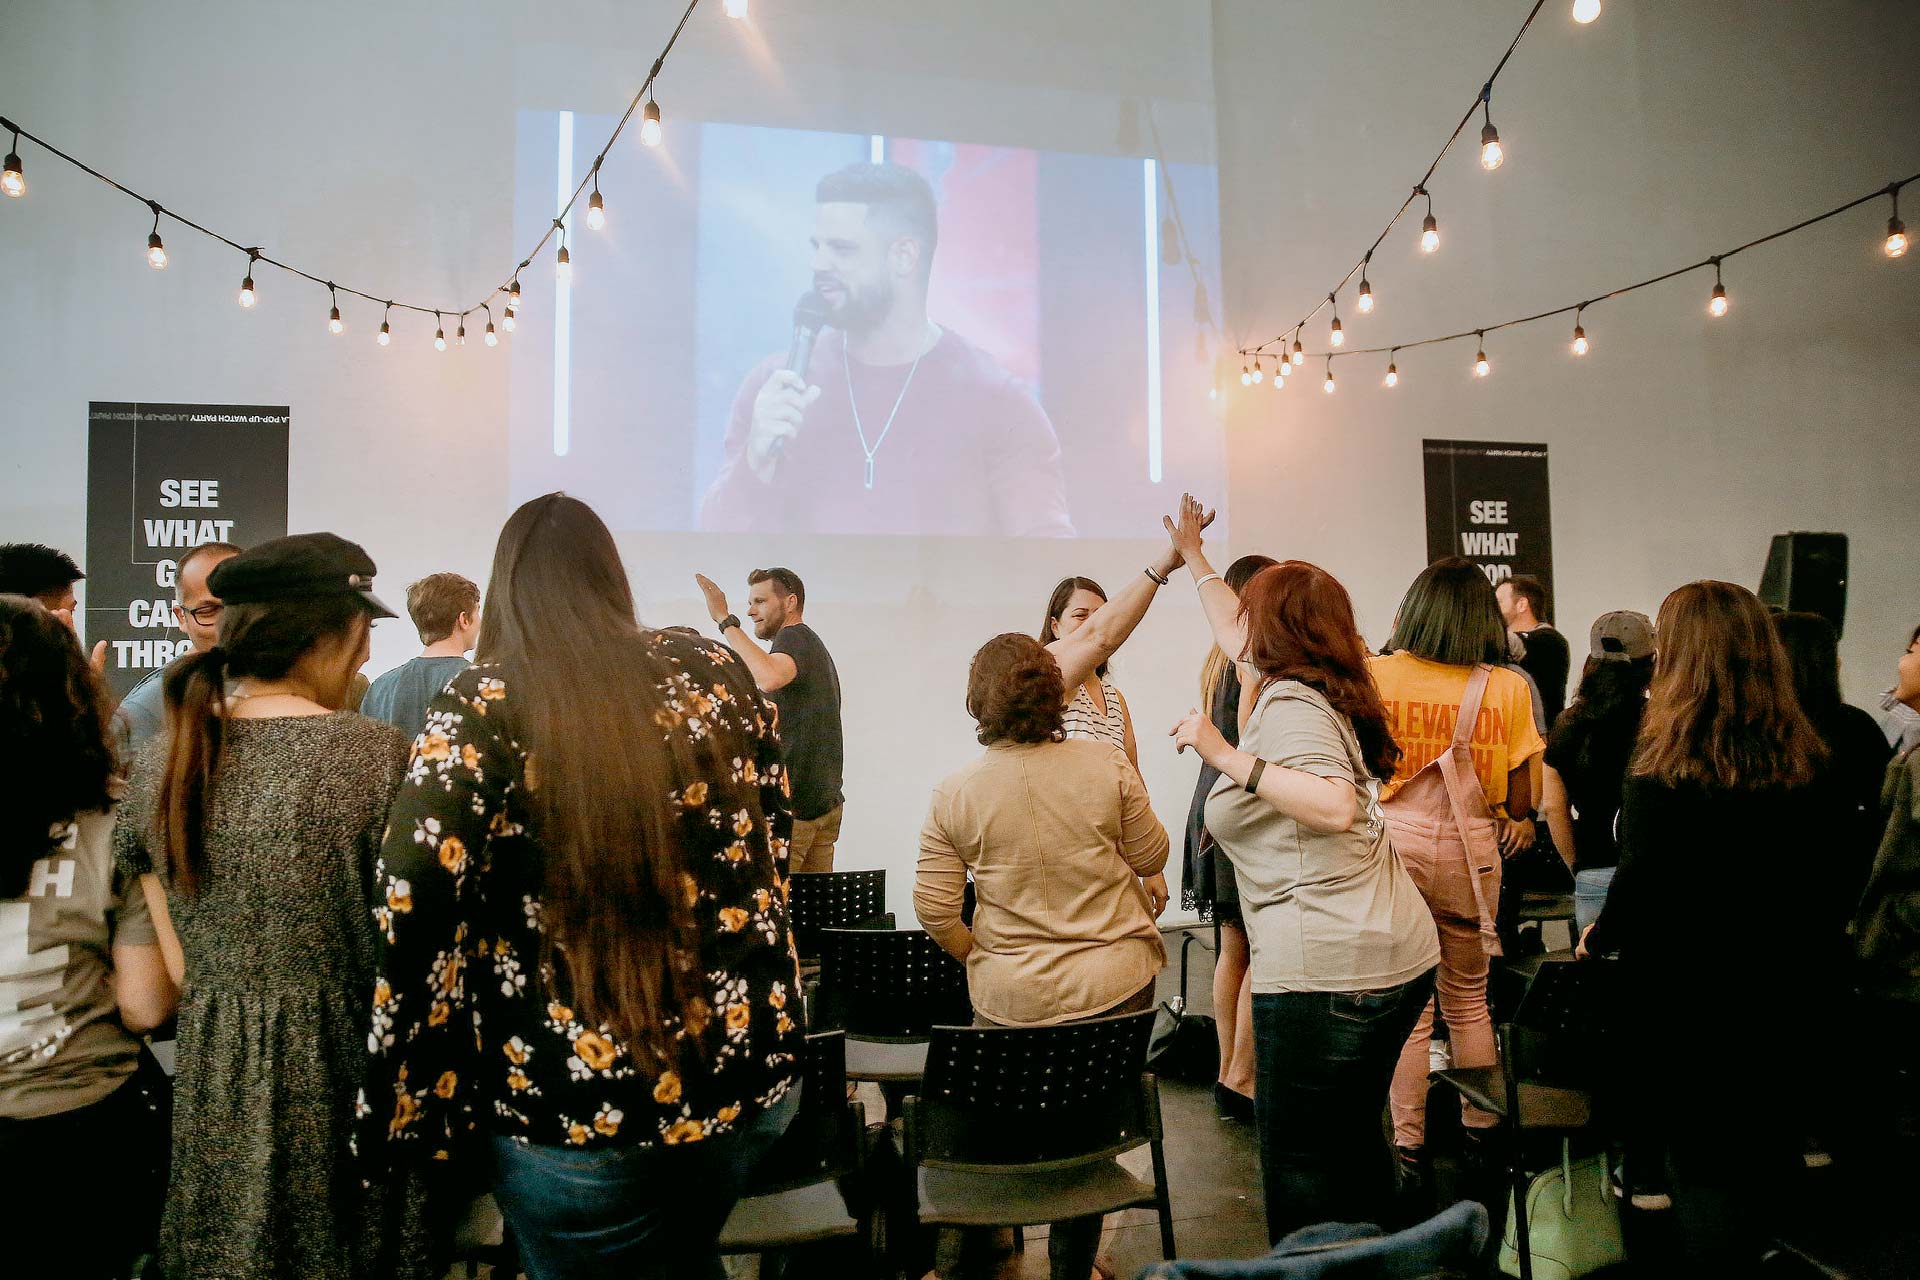 A group of people greeting each other while watching Pastor Steven Furtick at a watch party